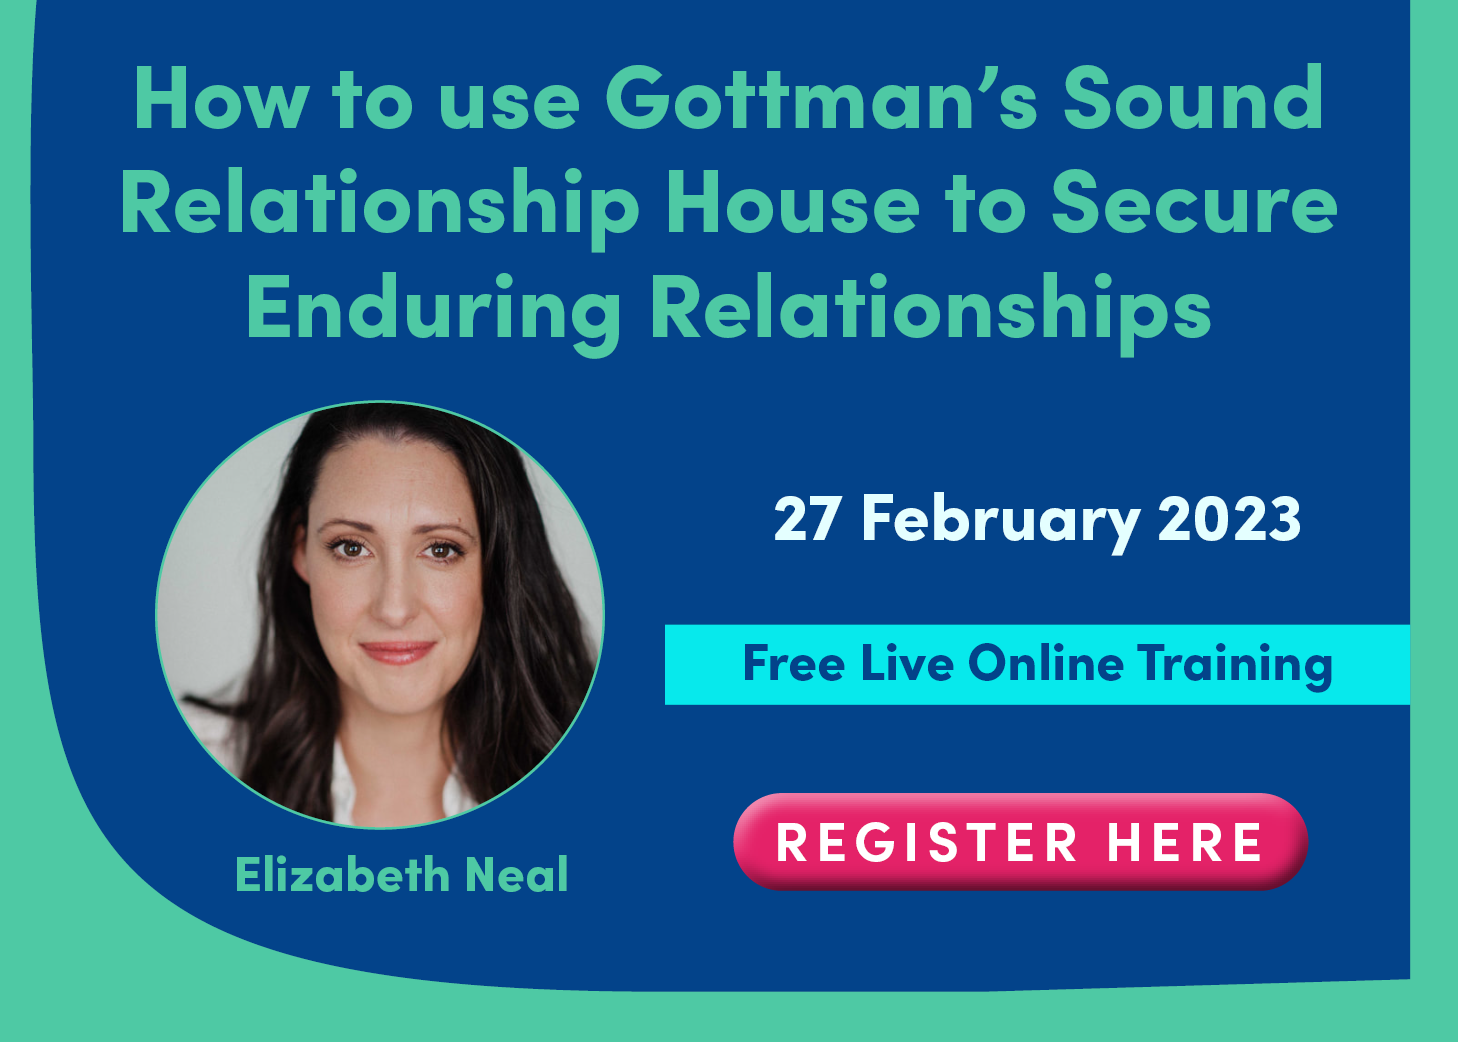 How to use Gottman’s 'Sound Relationship House' to secure enduring relationships